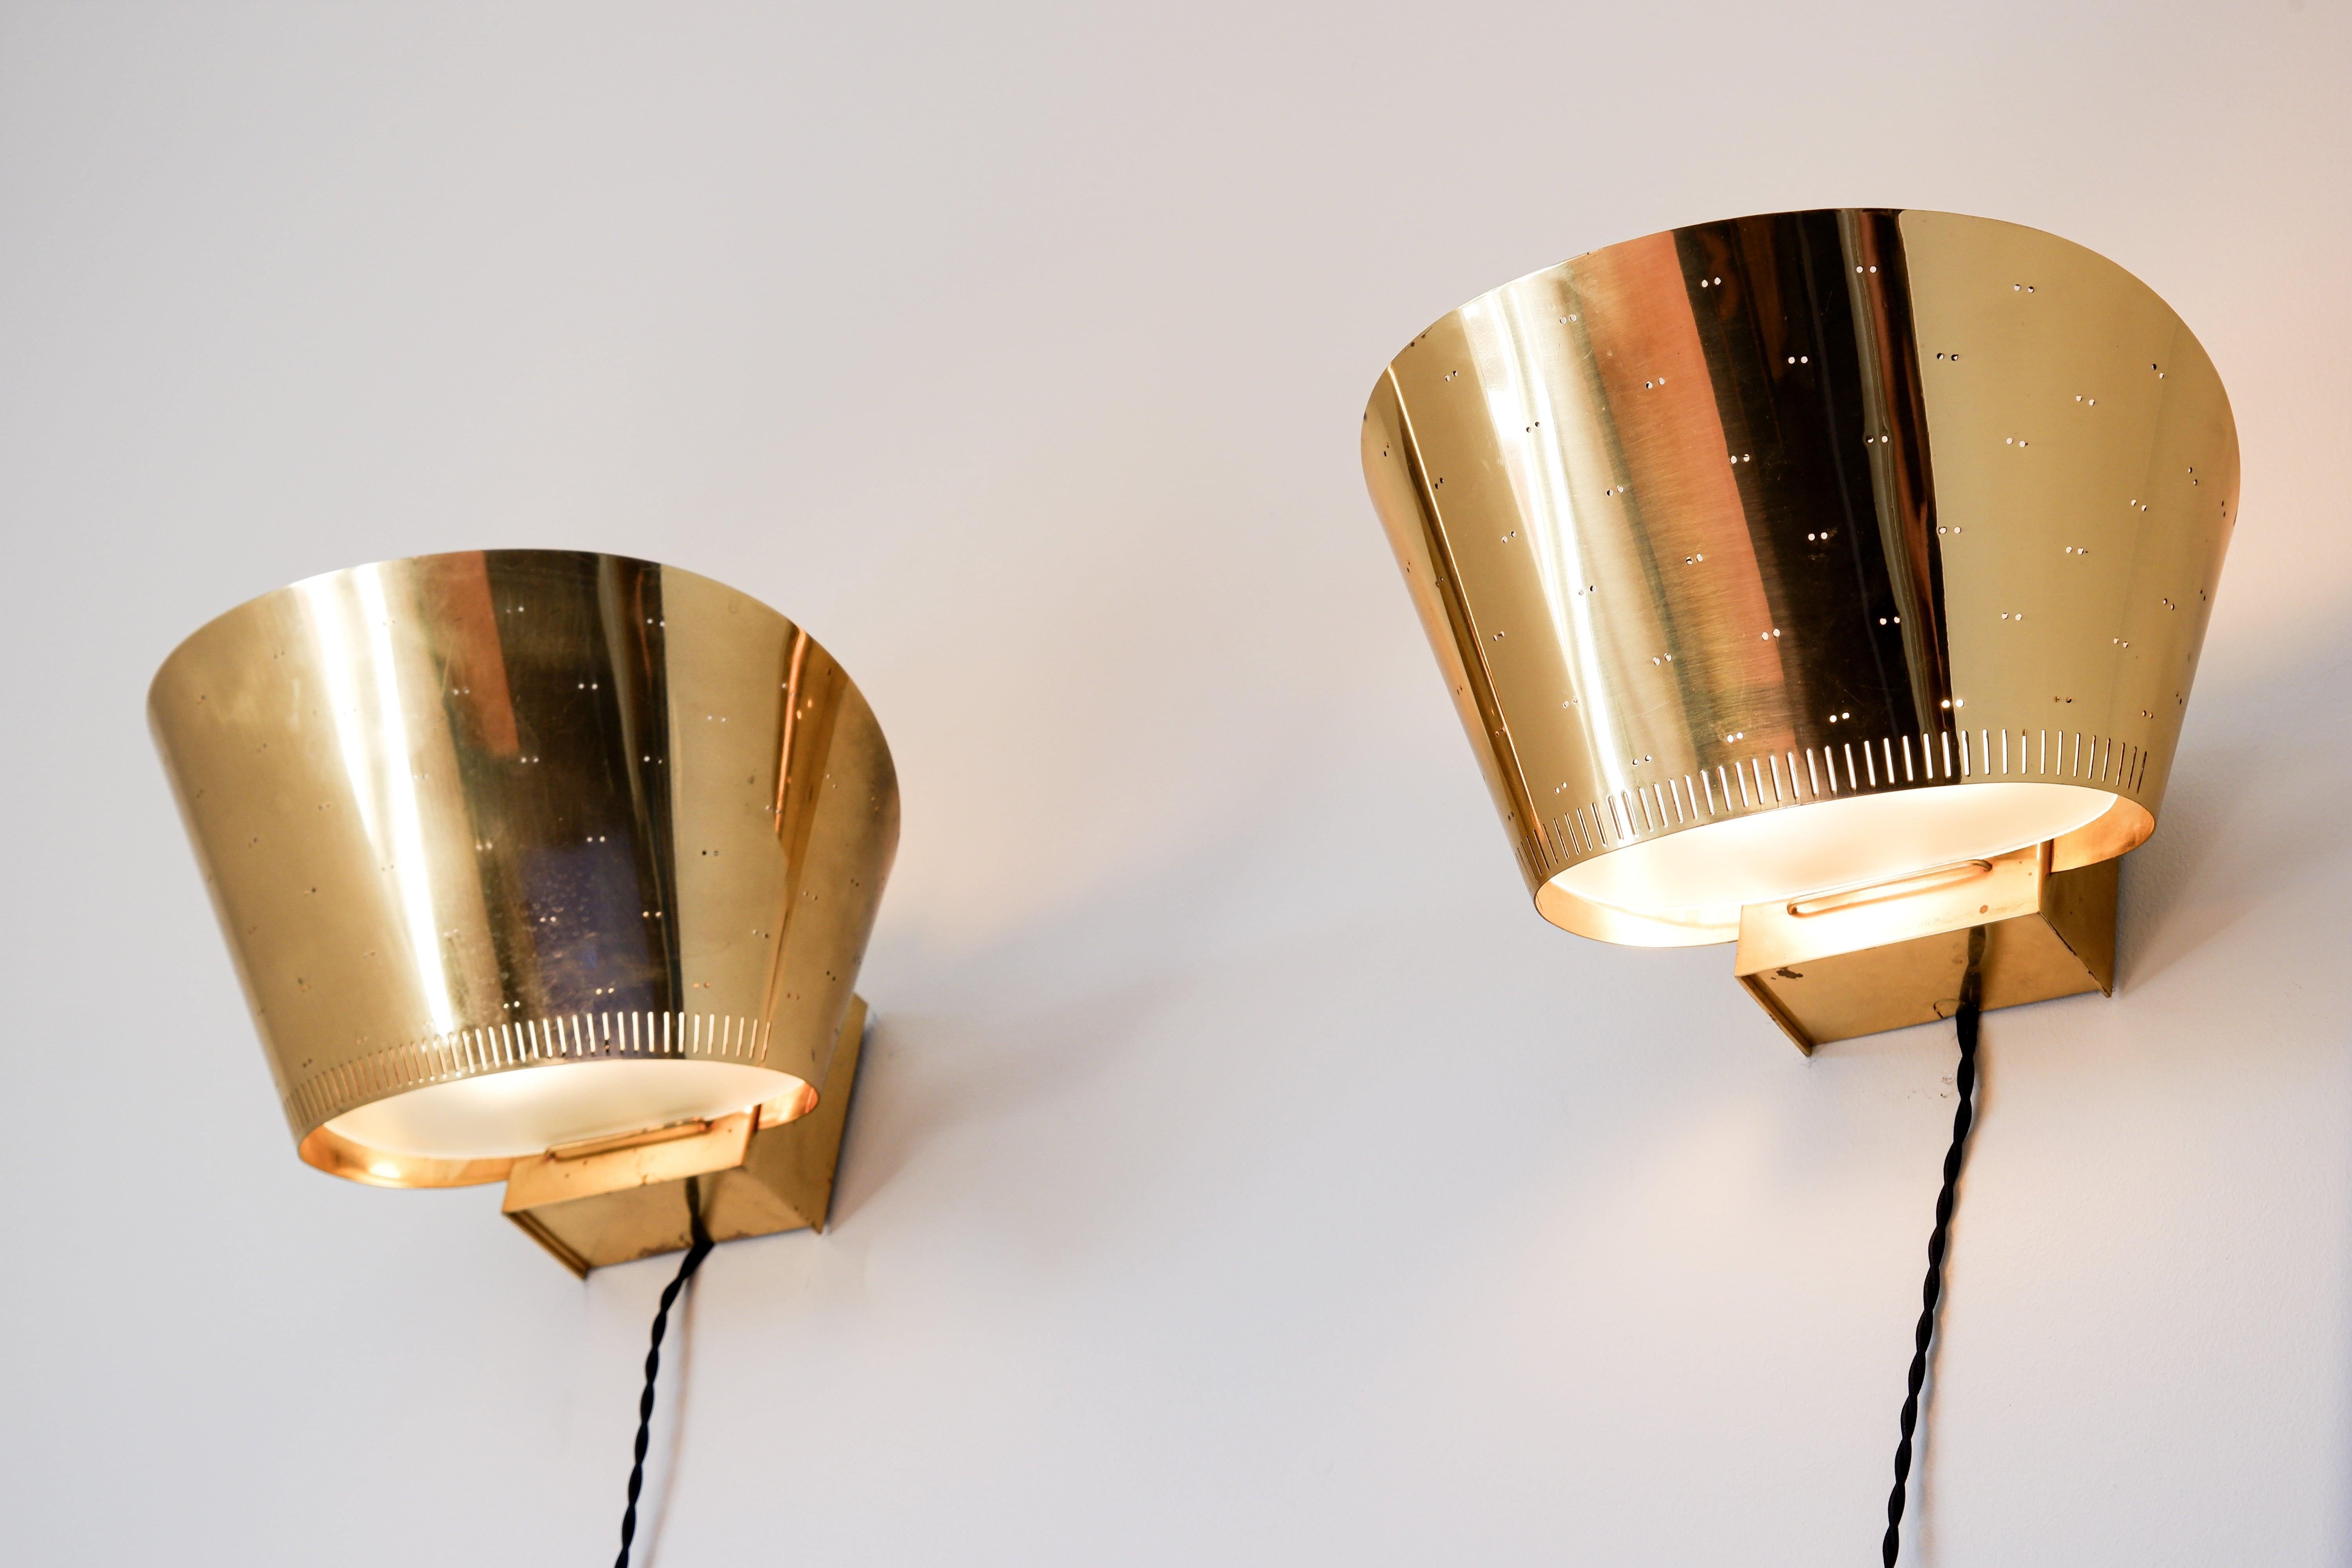 One of the most impressive Paavo Tynell wall lamps model, designed by Paavo Tynell and produced by Arnold Wiigs Fabrikker in Norway in 1950-tal on licence for Taito OY finland. The lamps are made in solid brass with two buble and a glass diffuseur.